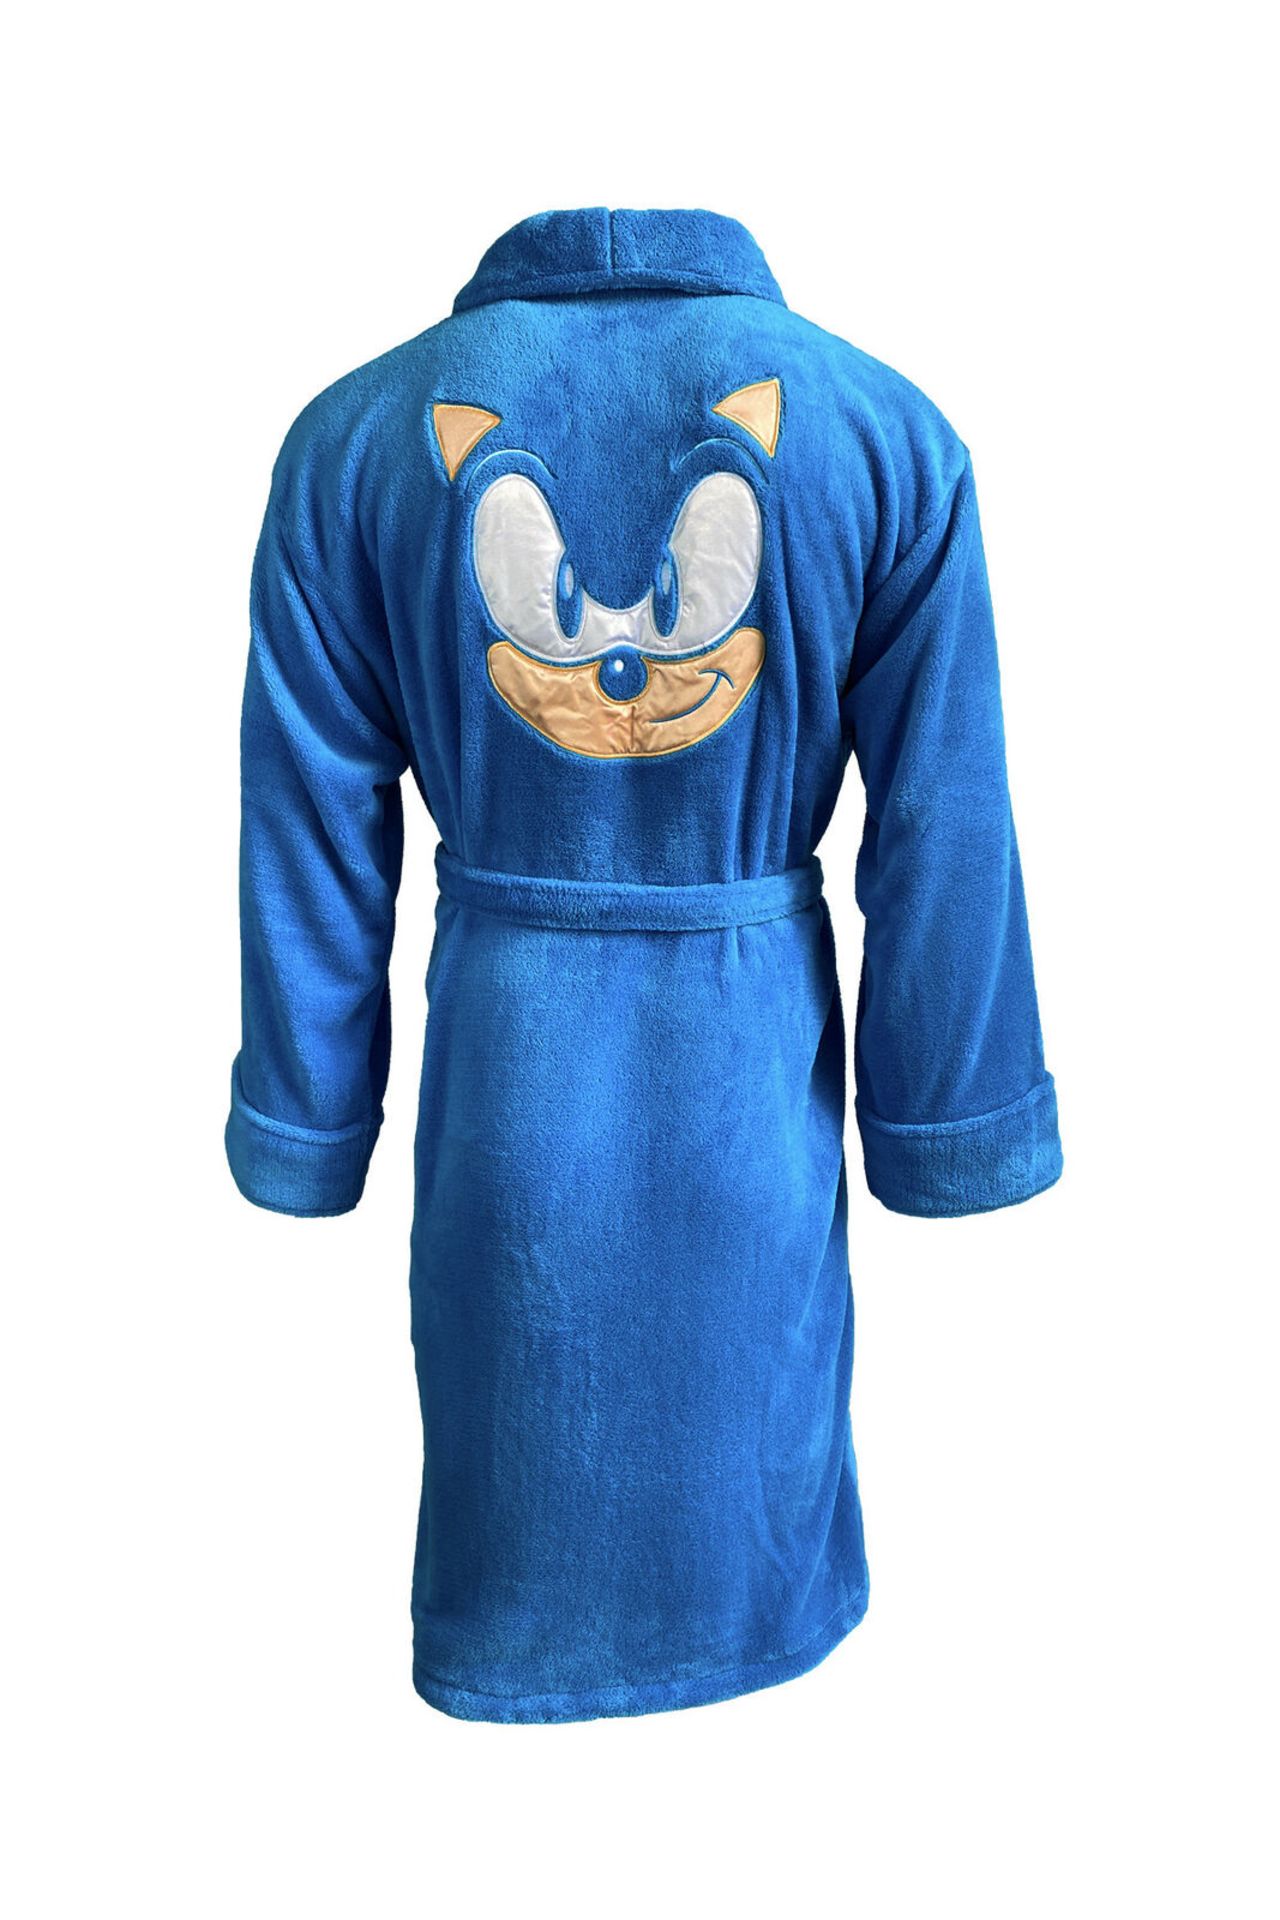 10 X BRAND NEW UNISEX LUXURIOUS SONIC THE HEDGEHOG CLASS OF 91 RETRO ADULTS DRESSING GOWN ROBE - Image 3 of 5